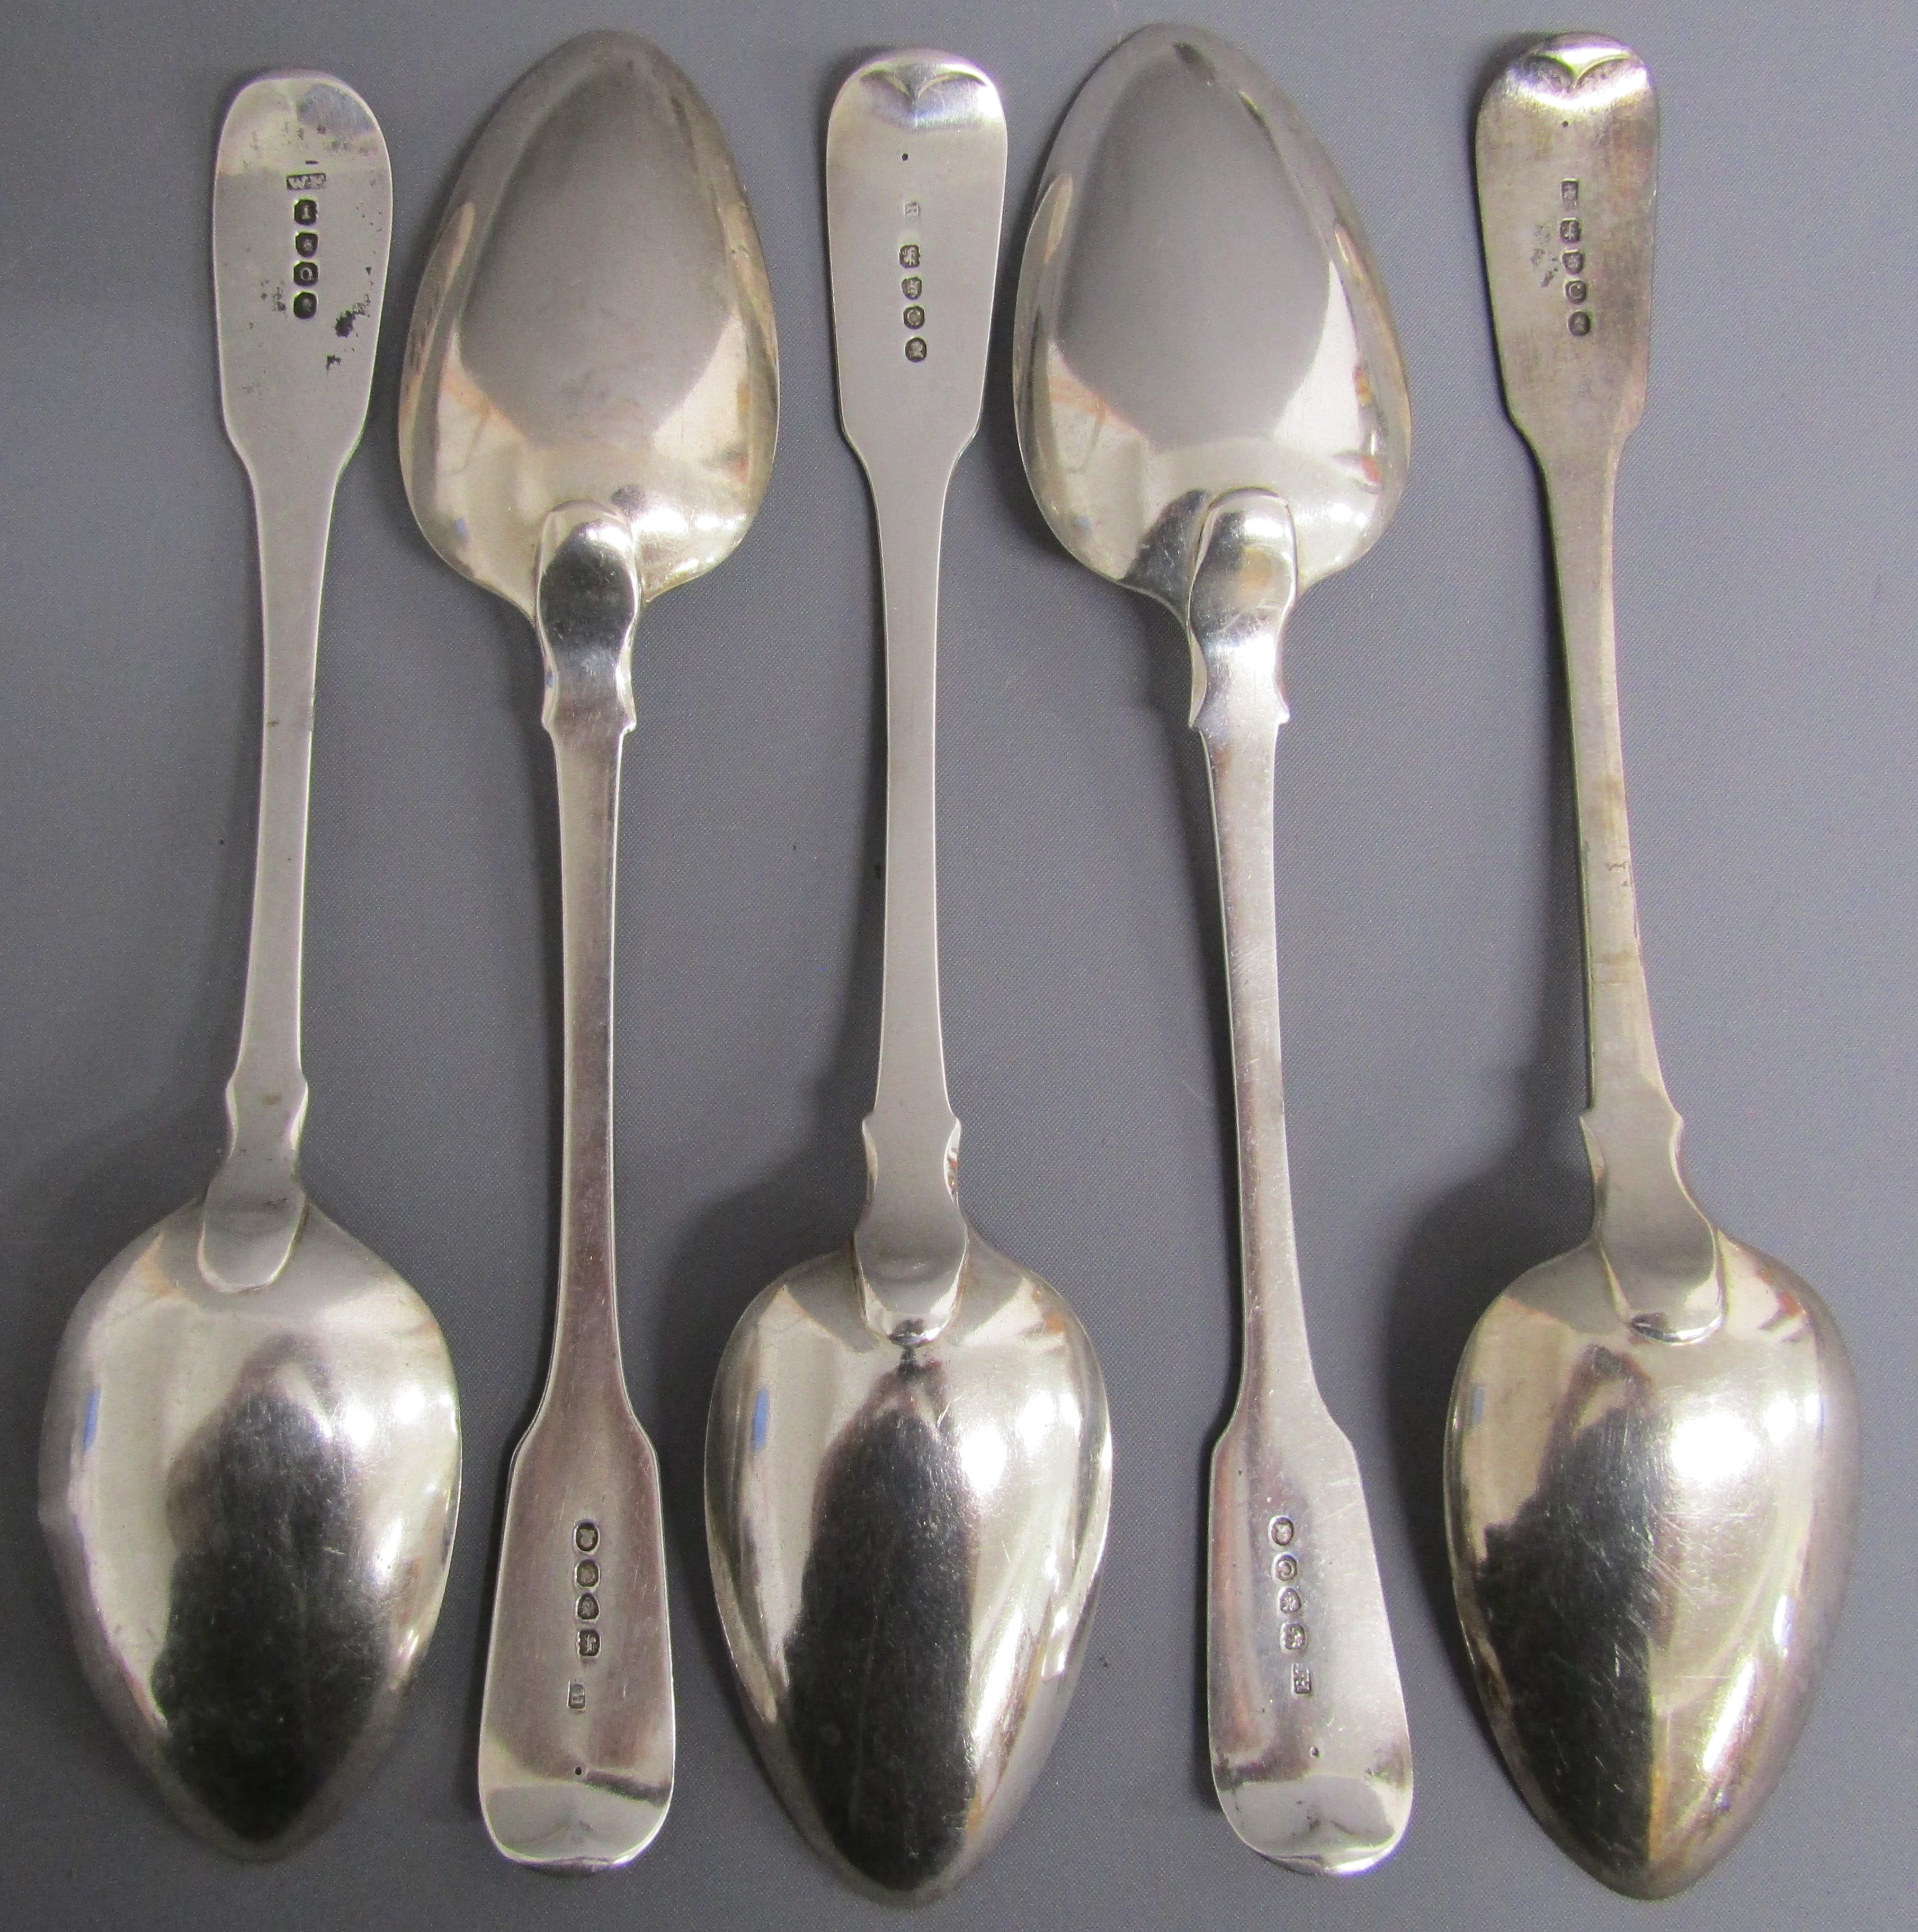 5 silver serving spoons embossed with a wheatsheaf - 4 Possibly Richard Poulden London 1818 & 1 - Image 2 of 4